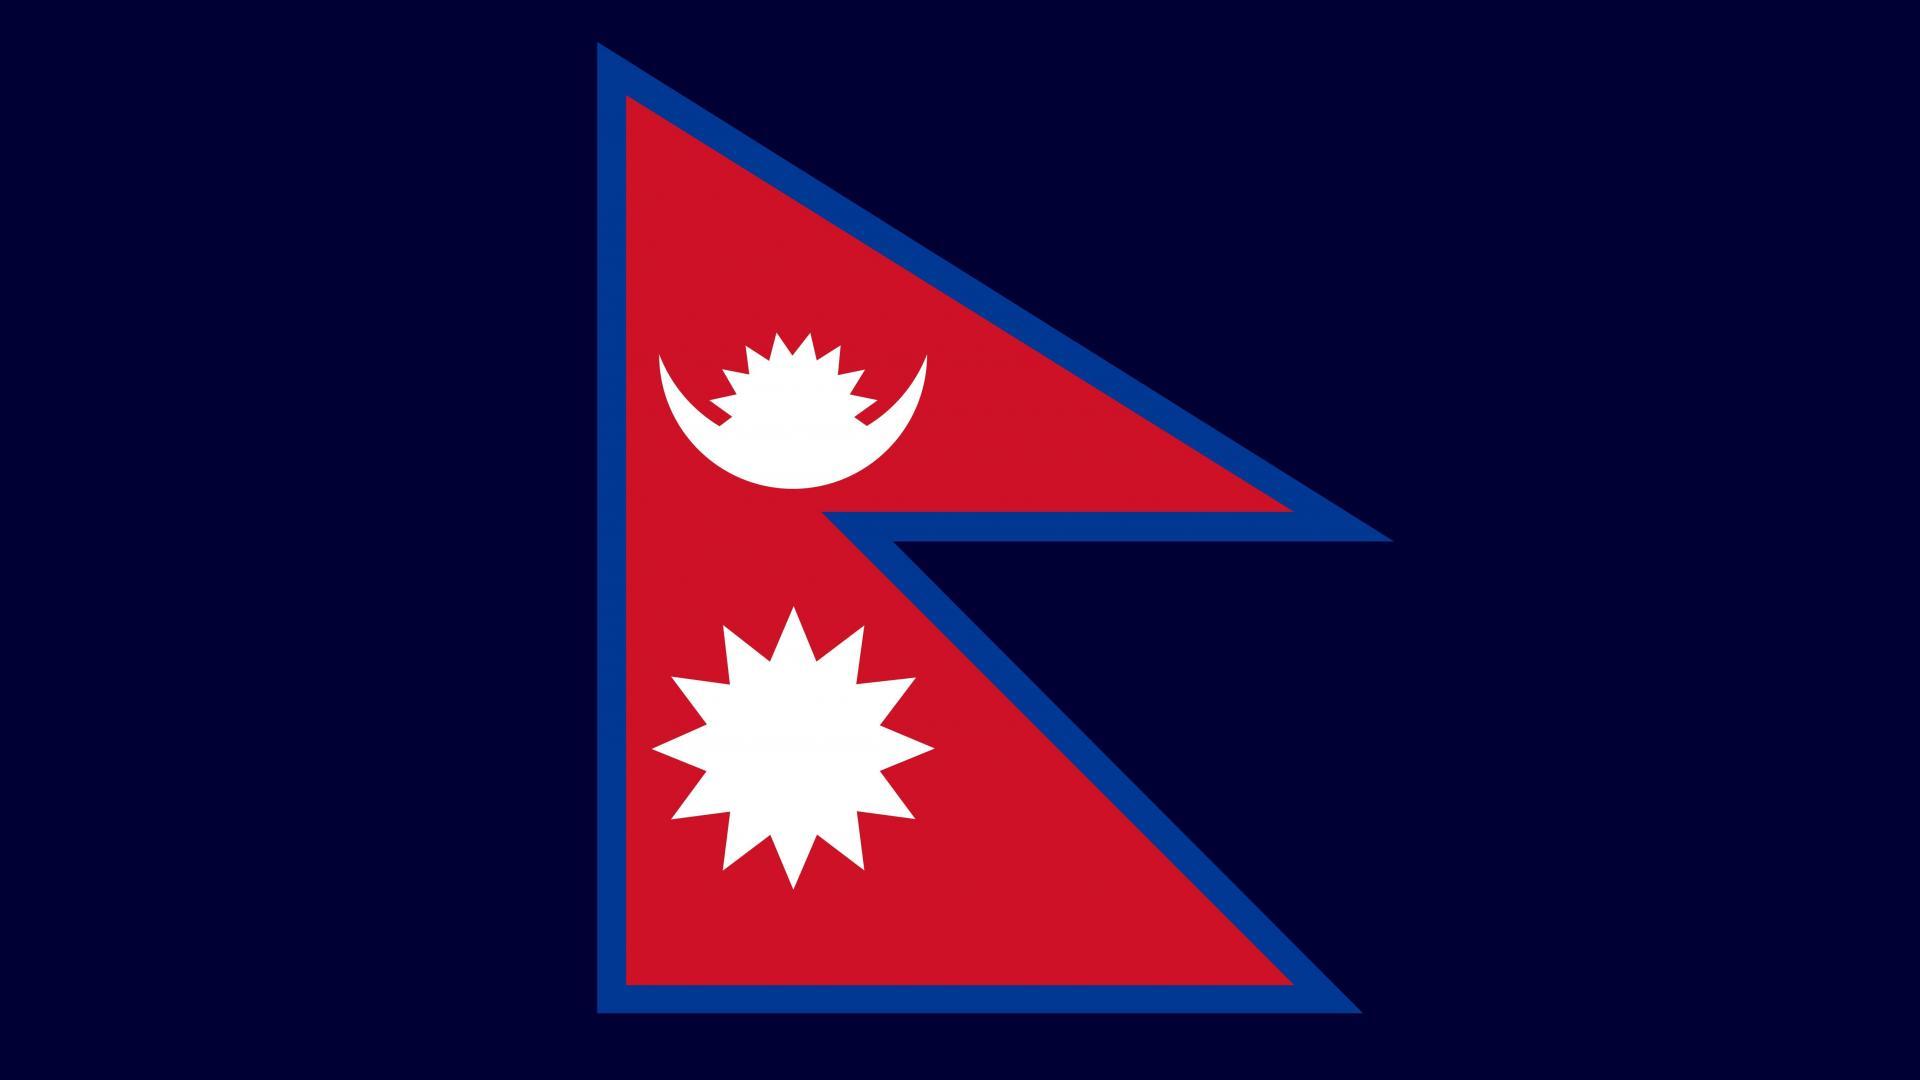 3D Nepal Flag Live Wallpaper Picture Of Flag Imageco.Org